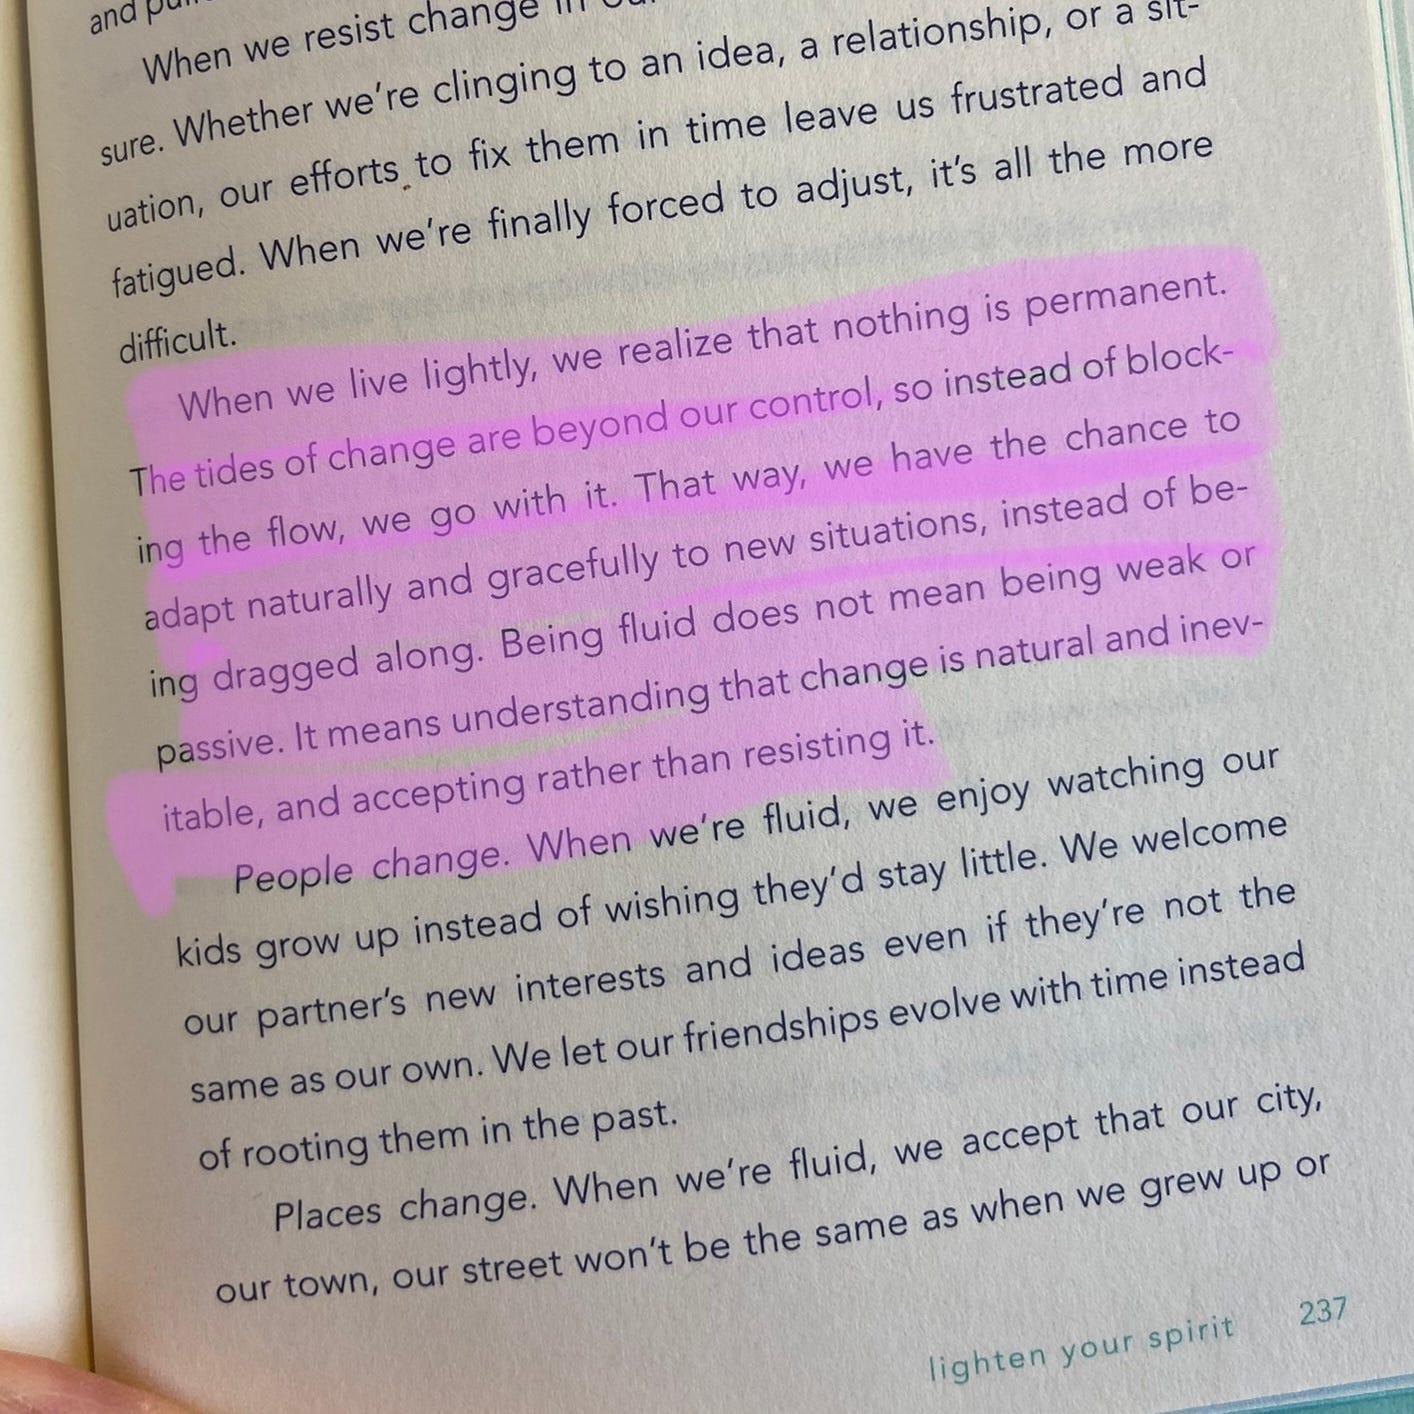 A highlighted passage in a book on living lightly